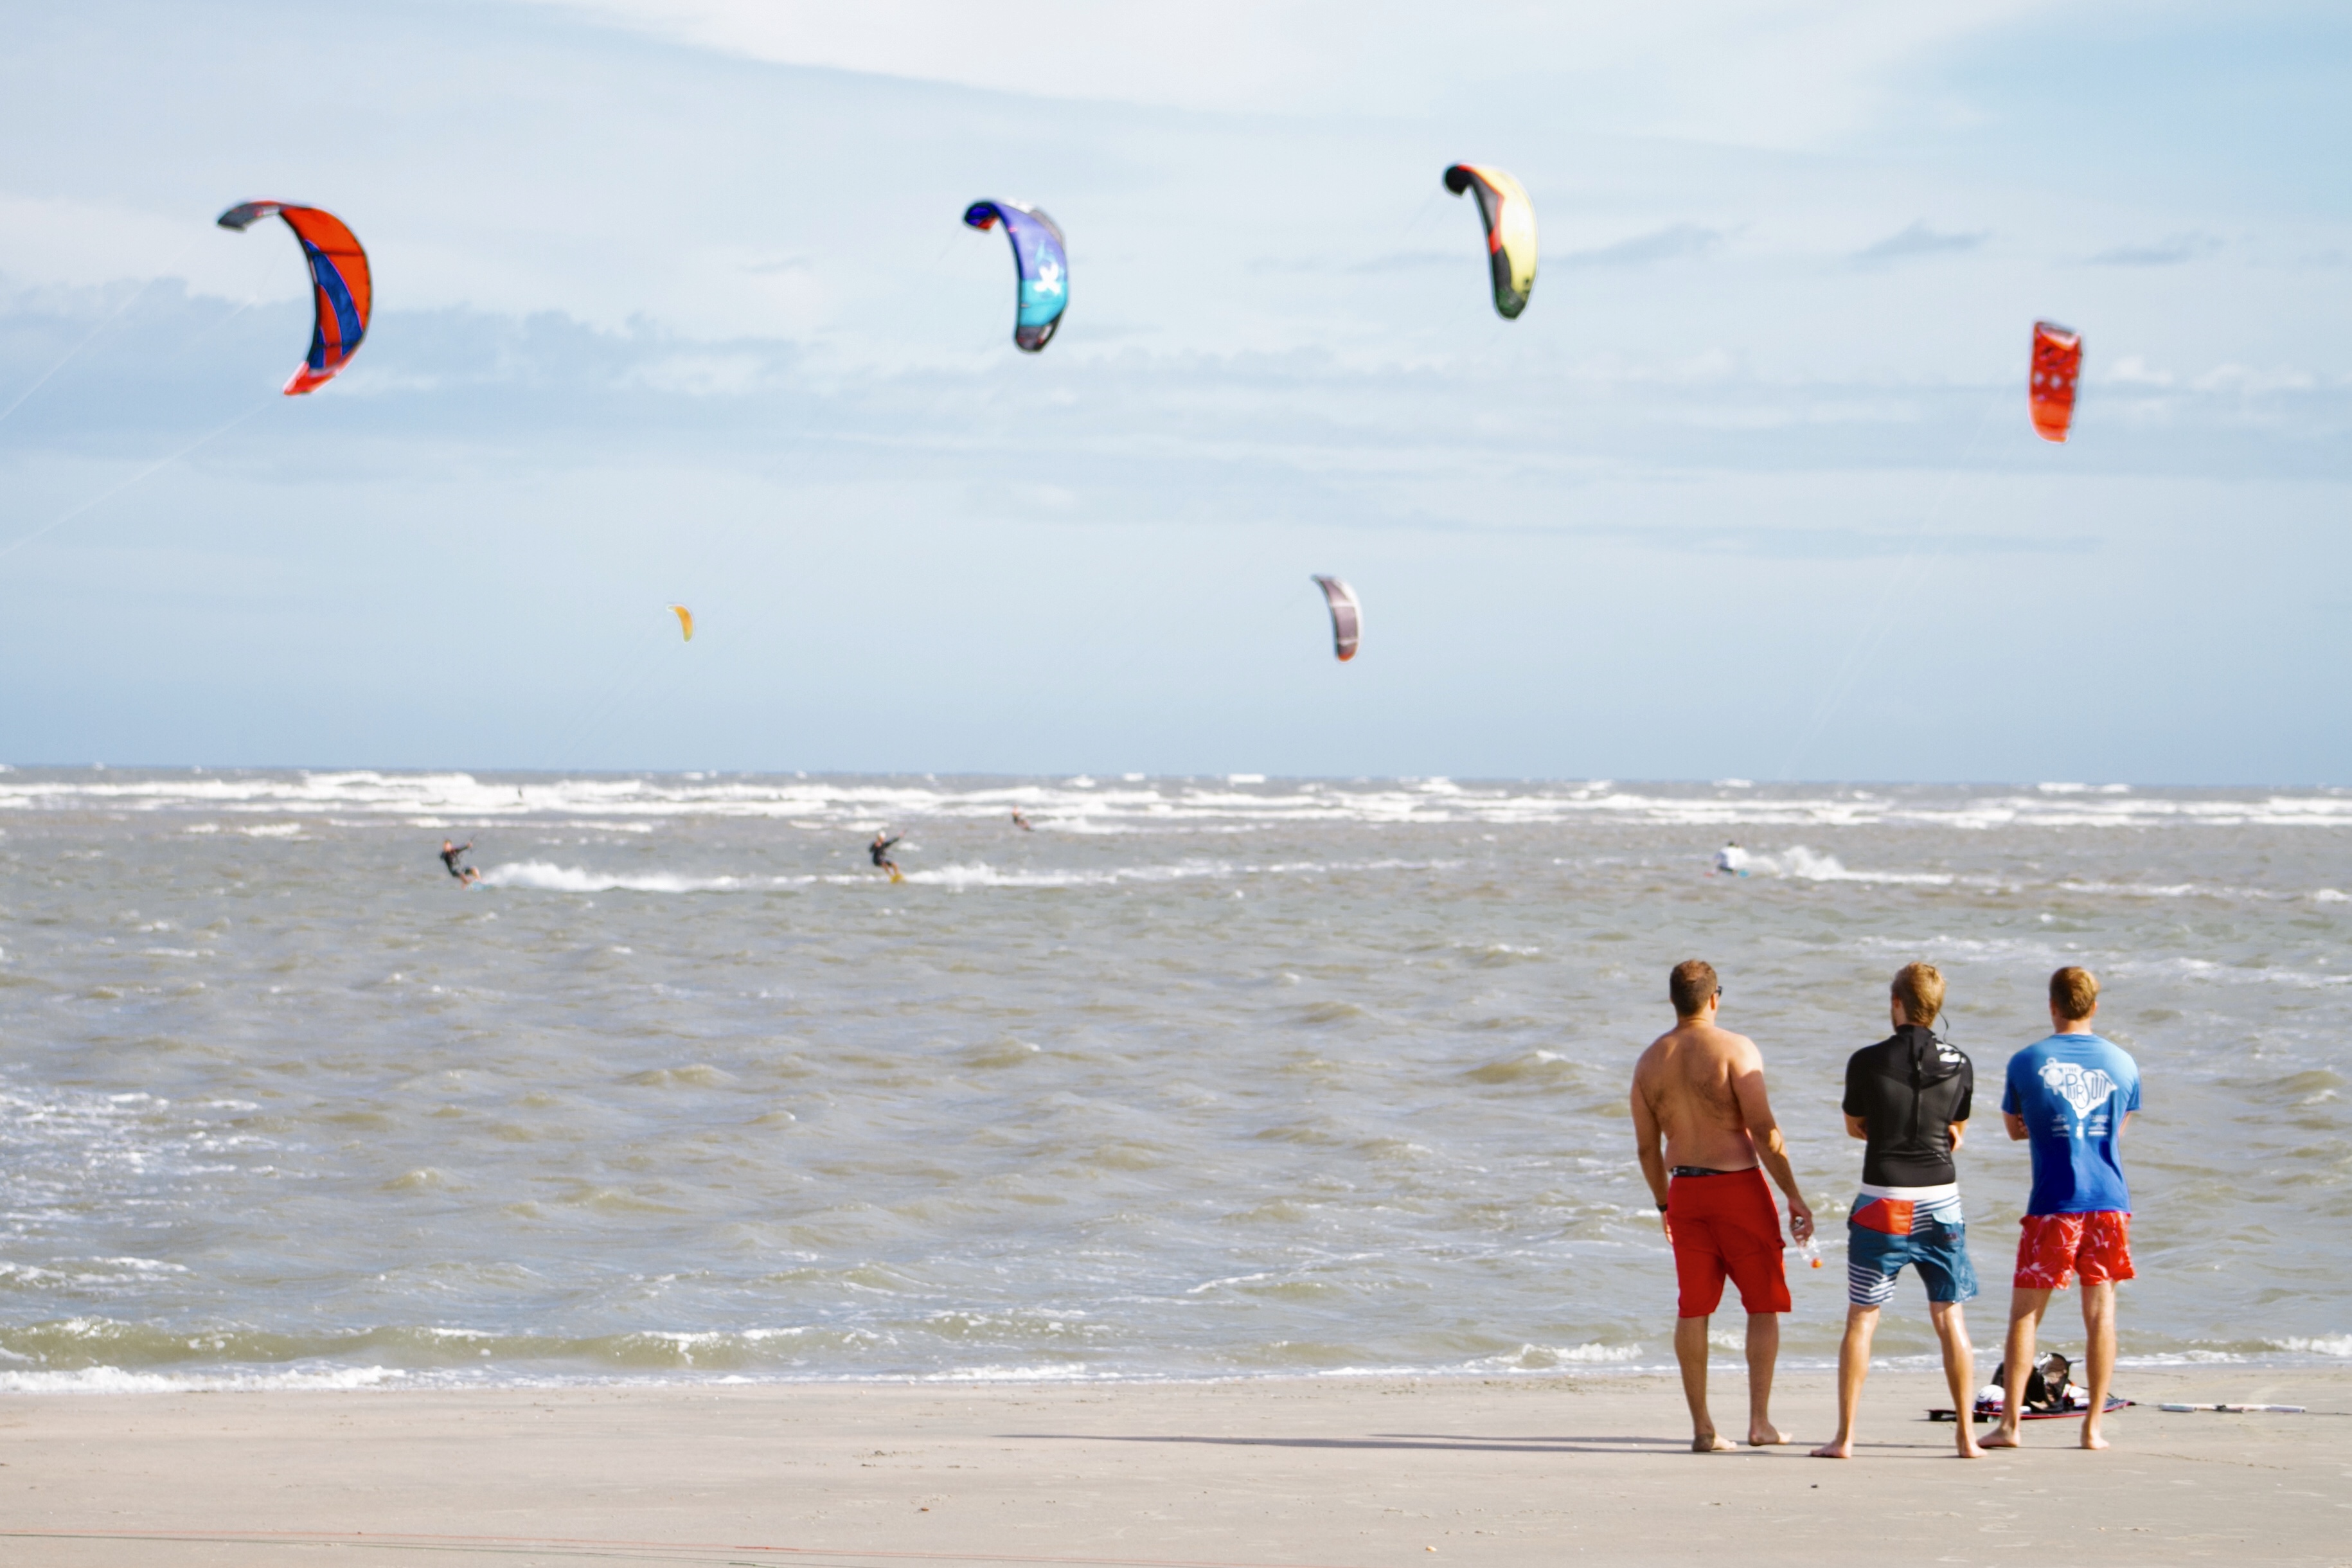 Though windsurfing is still enjoyed by watersports enthusiasts, kiteboarding is exploding in popularity on the South Carolina coast.